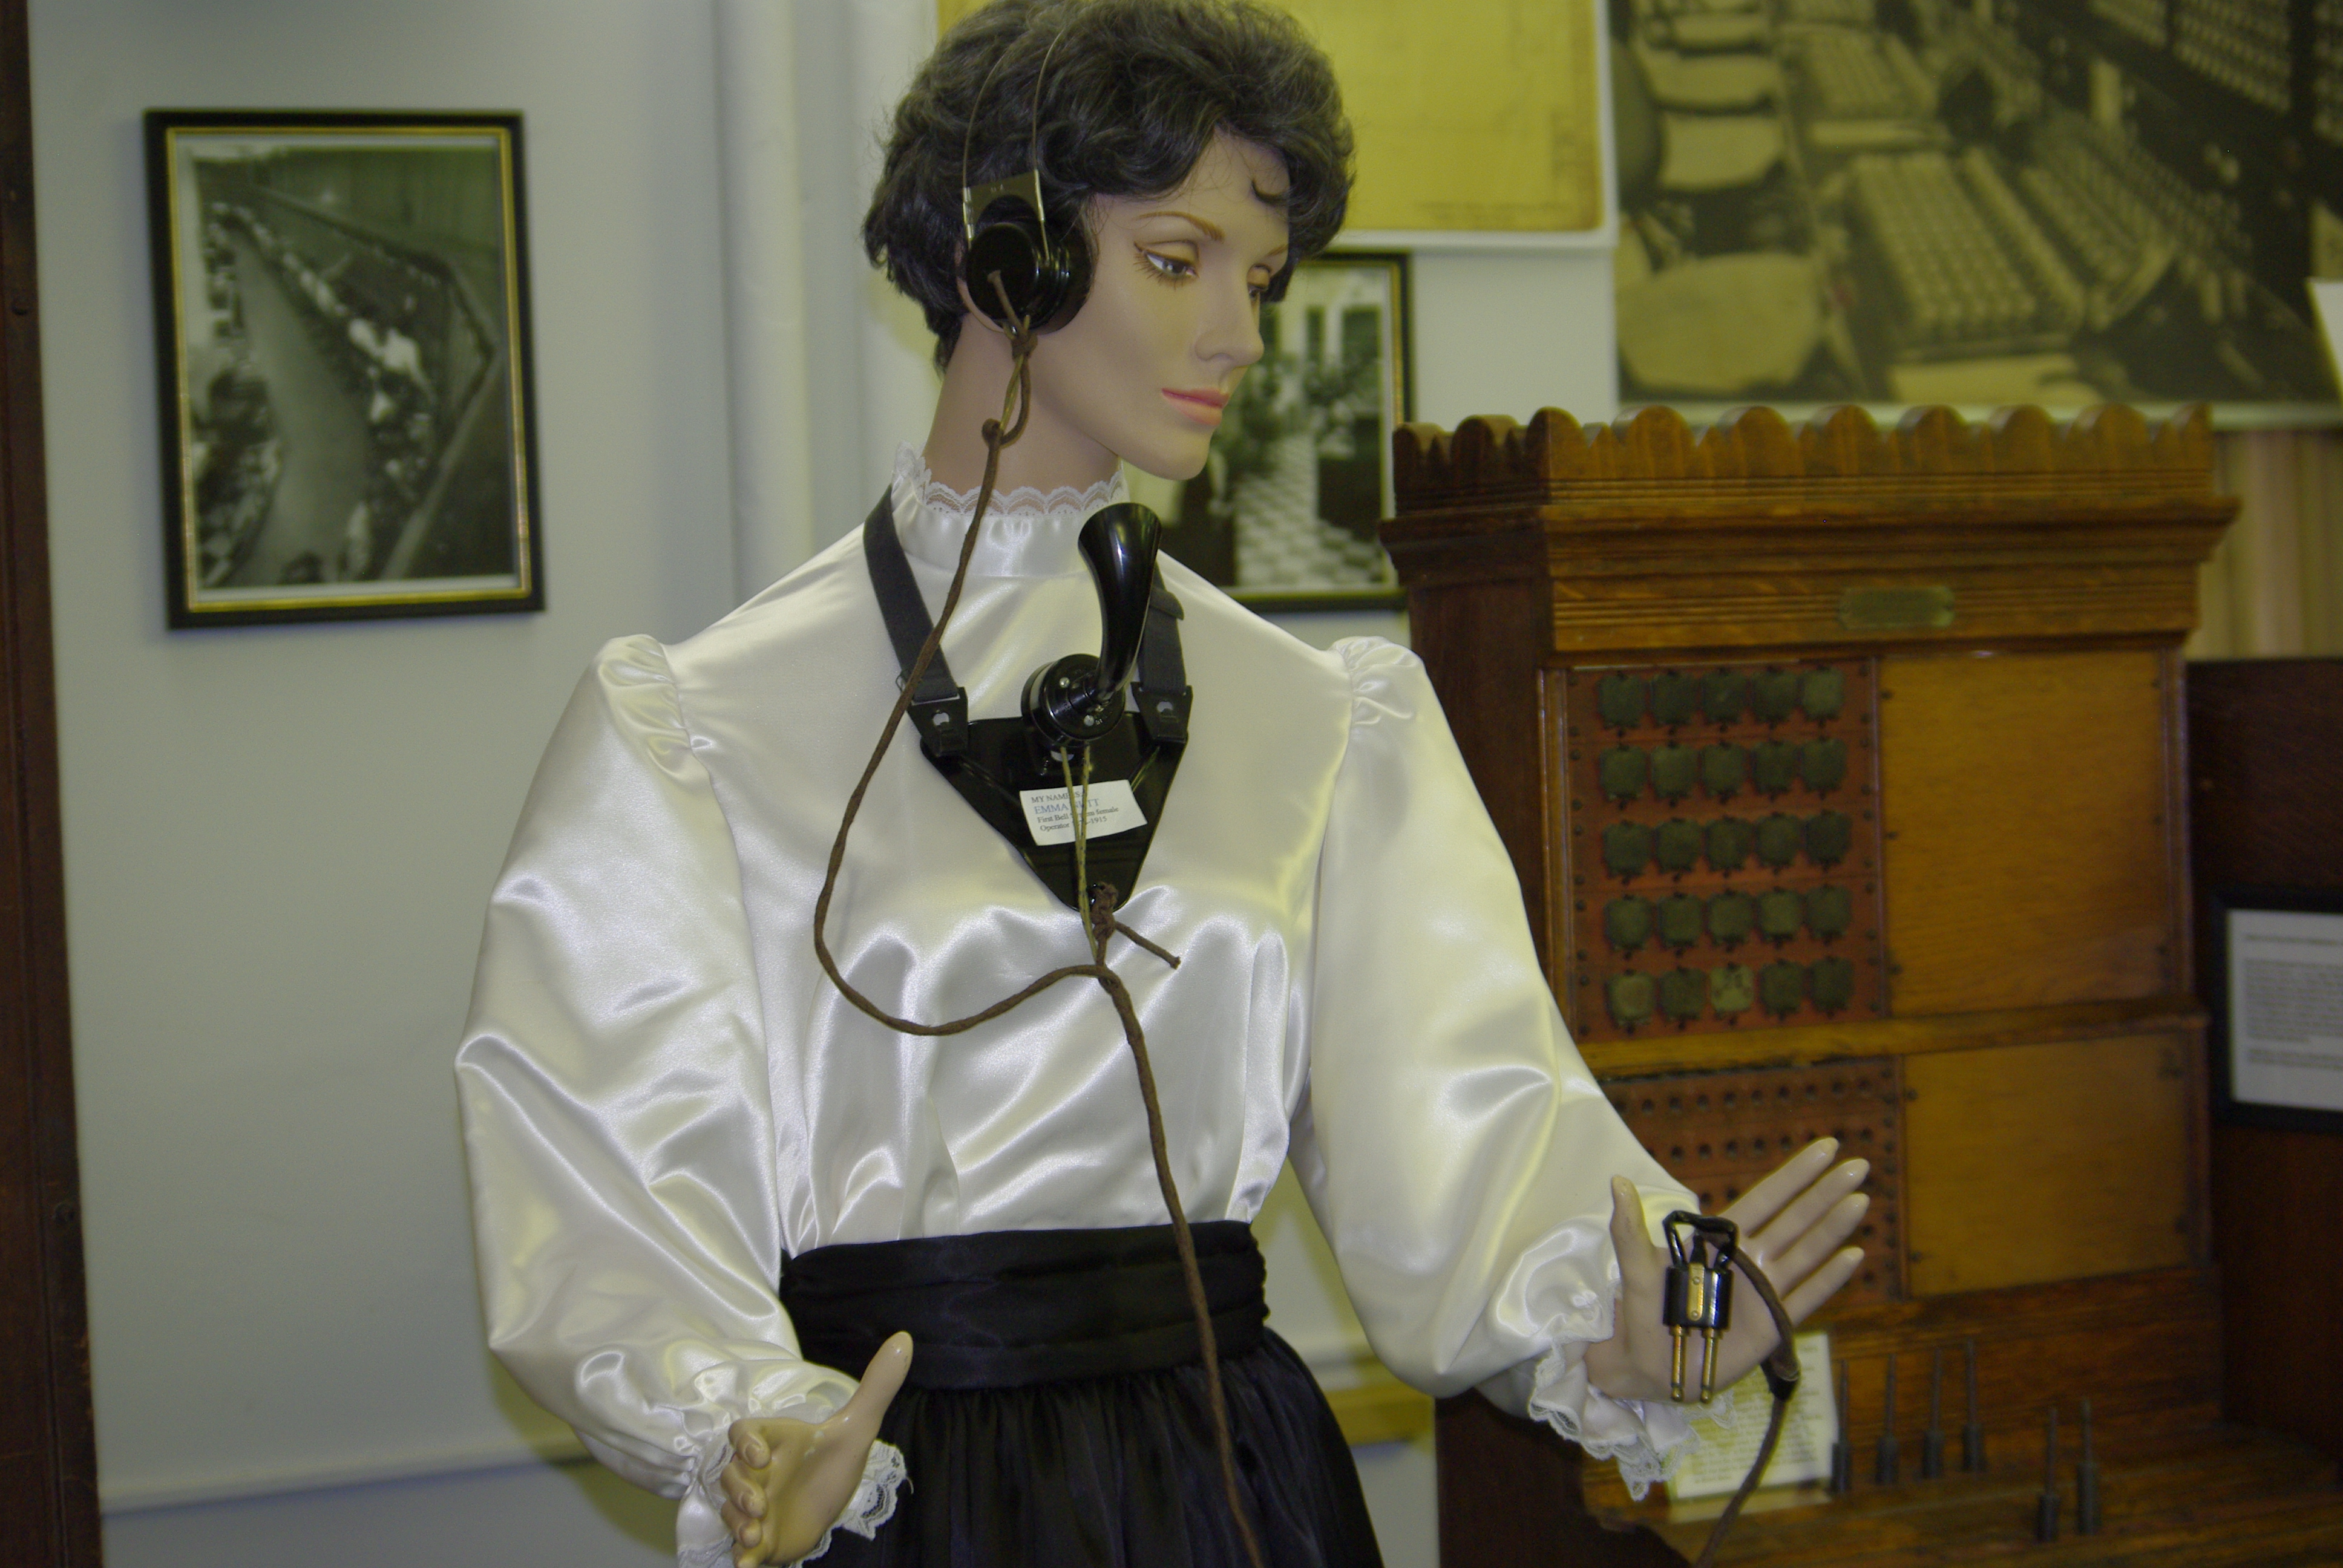 mannequin dressed as a telephone operator